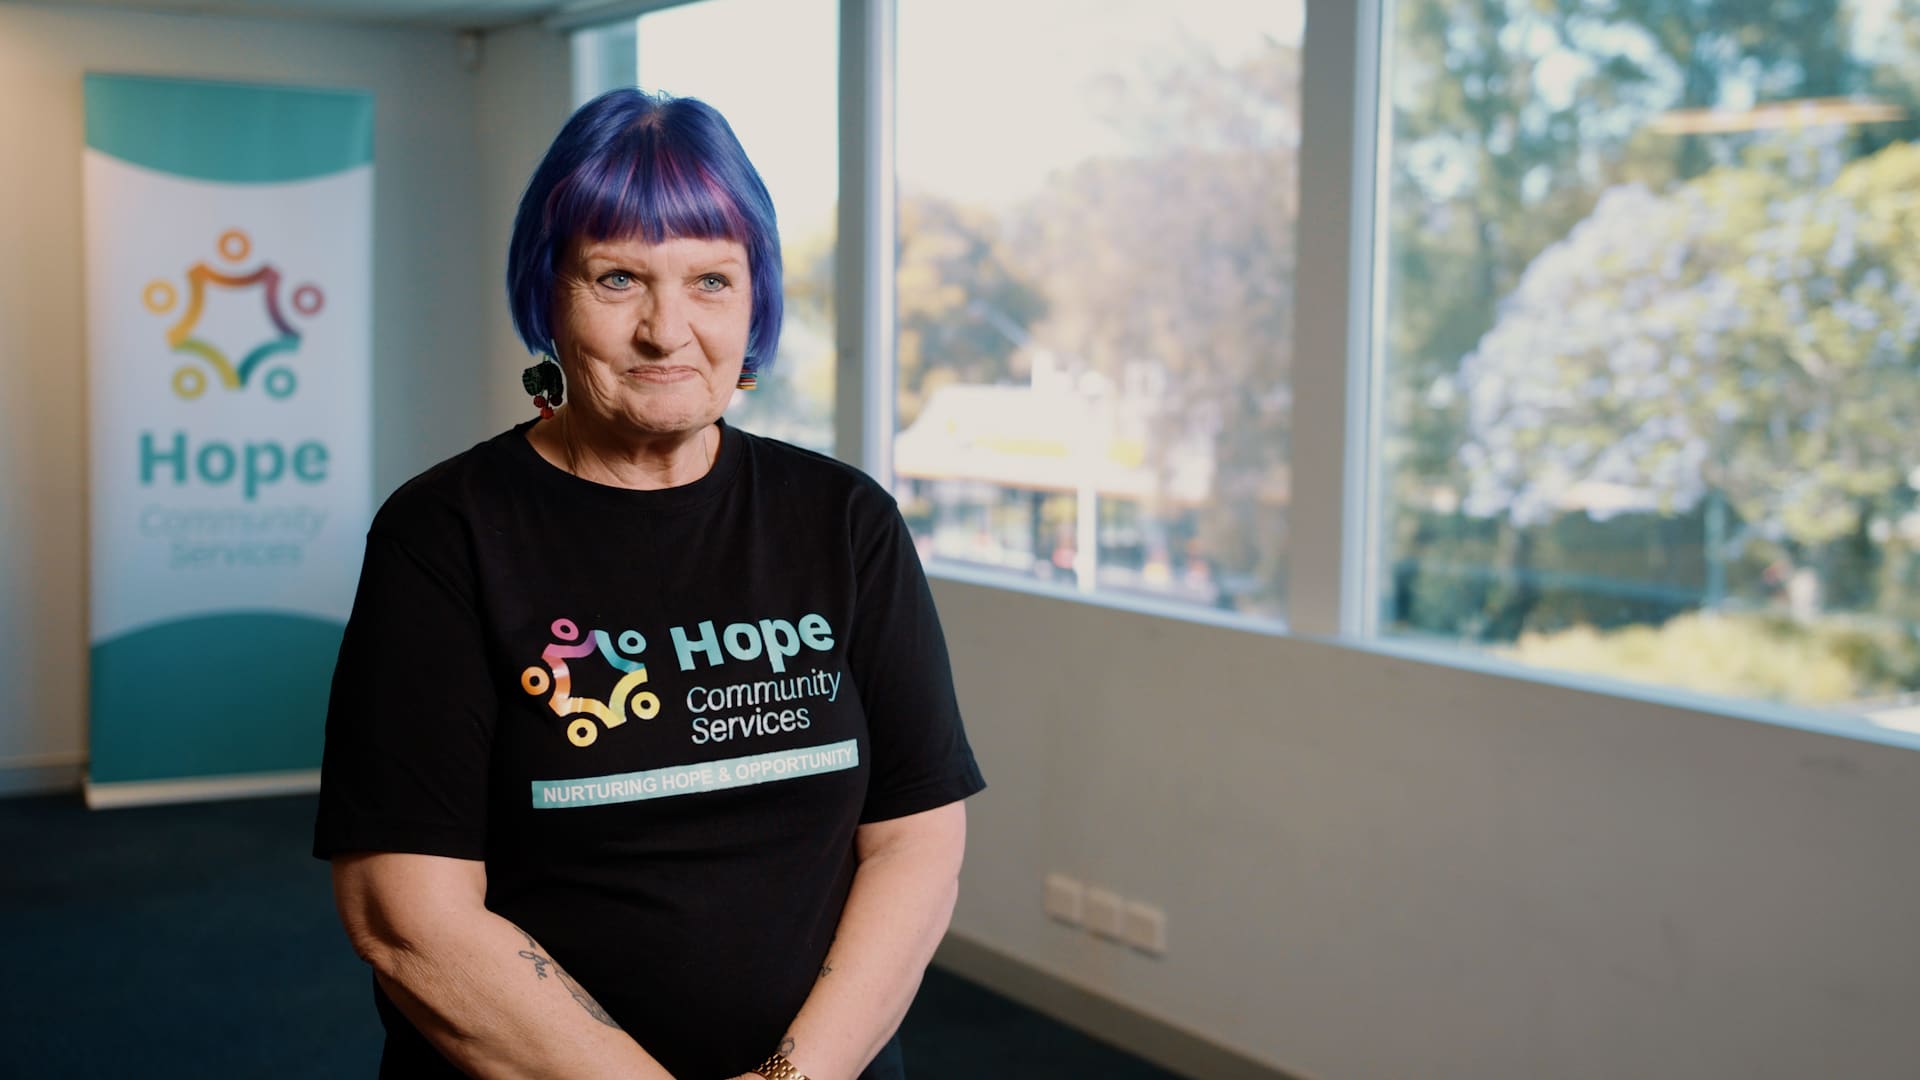 Profile picture of Leeanne Bates - a woman with purple hair who is wearing a black t-shirt with Hope Community Services written on it.